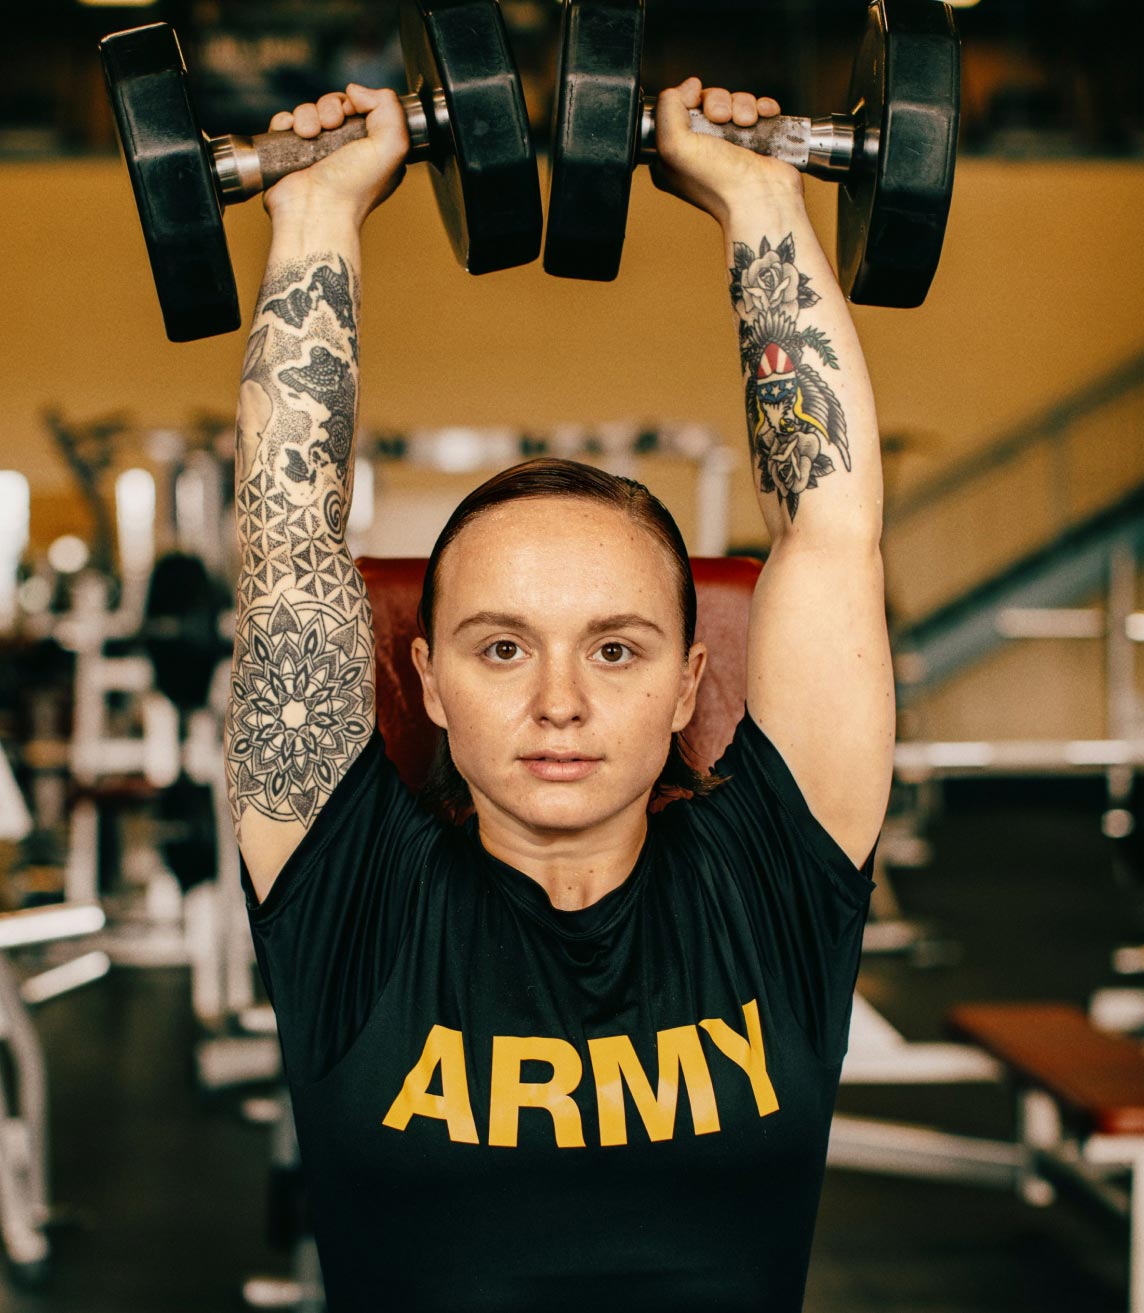 Female Soldier in an Army tee shirt lifting dumbells over her head